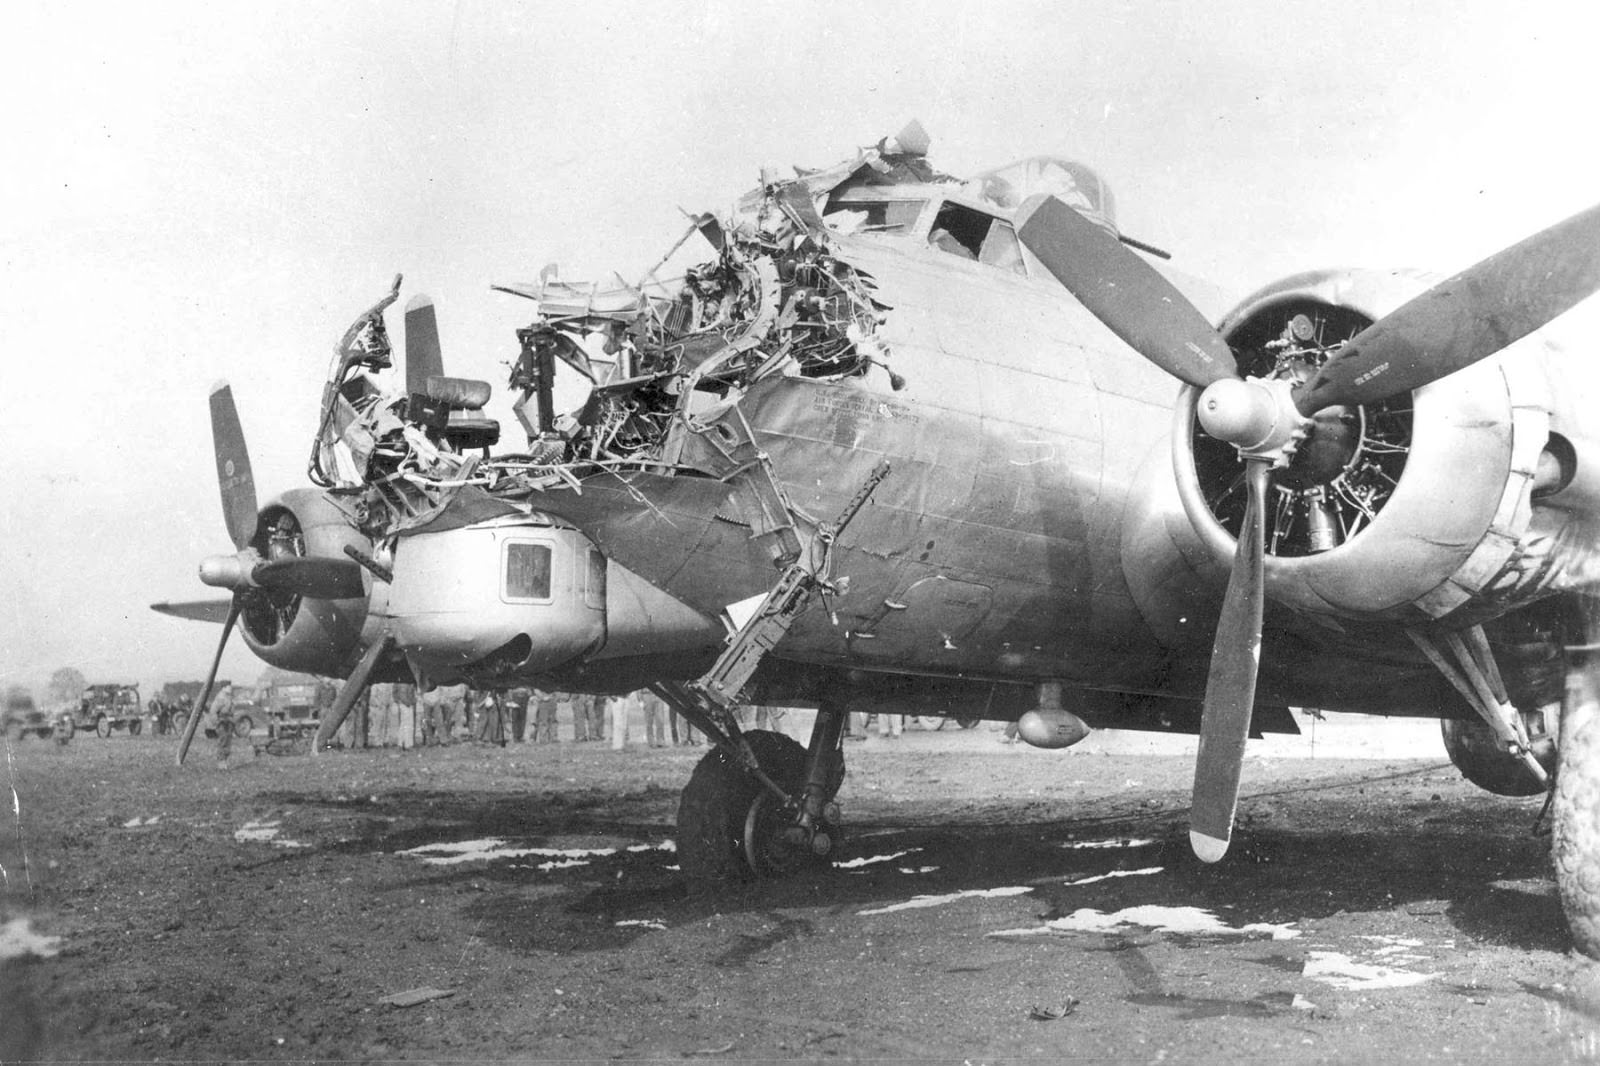 A damaged US B-17 Bomber after a mission over Cologne, Germany in 1944.